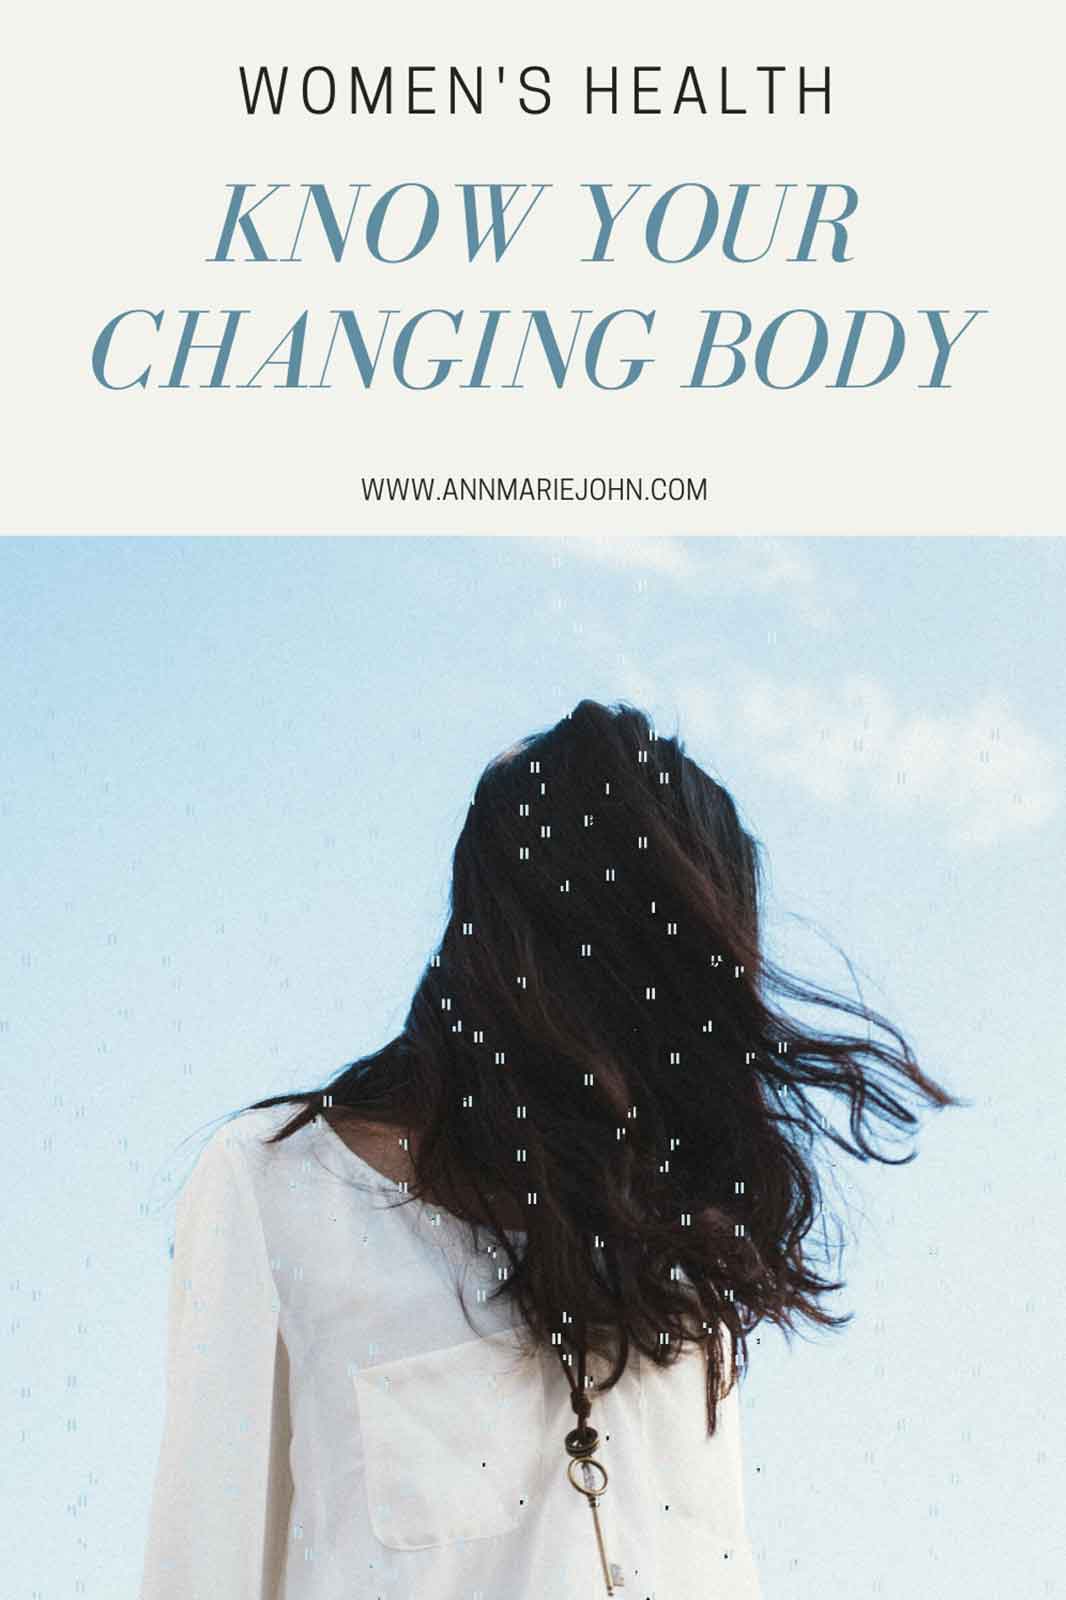 Women's Health: Know Your Changing Body